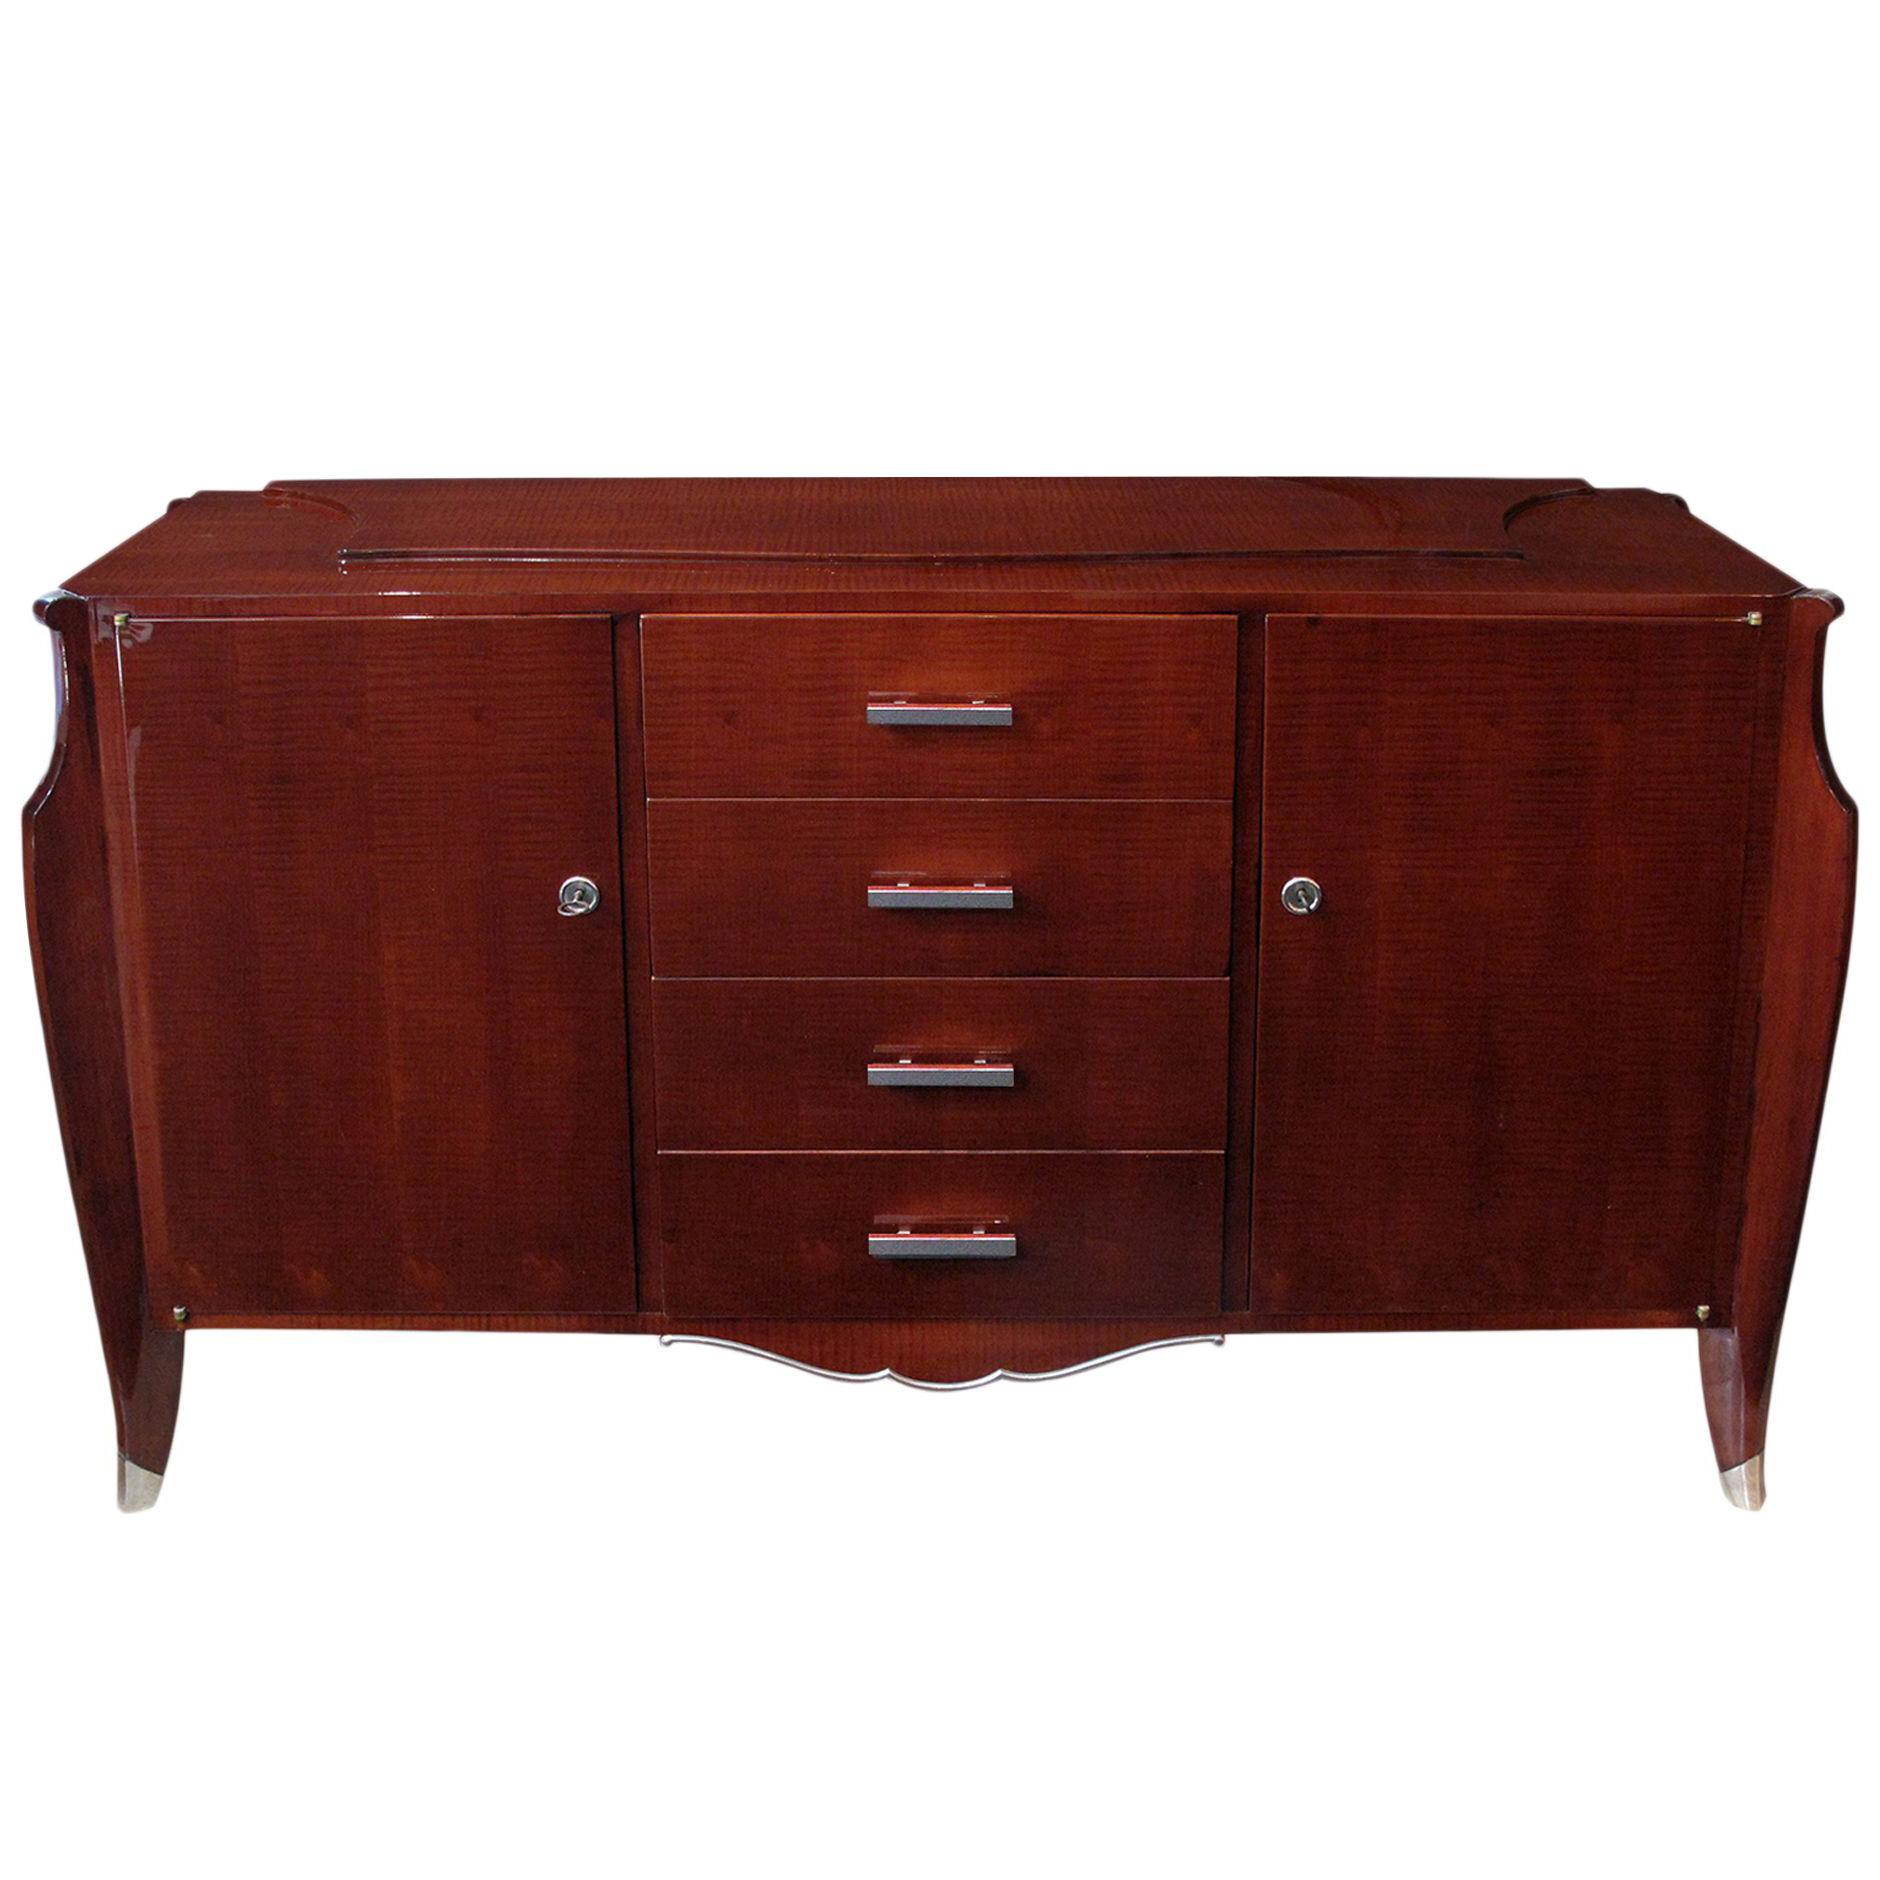 A Superb Quality French Art Deco Tiger-Mahogany Sideboard,  1930's.